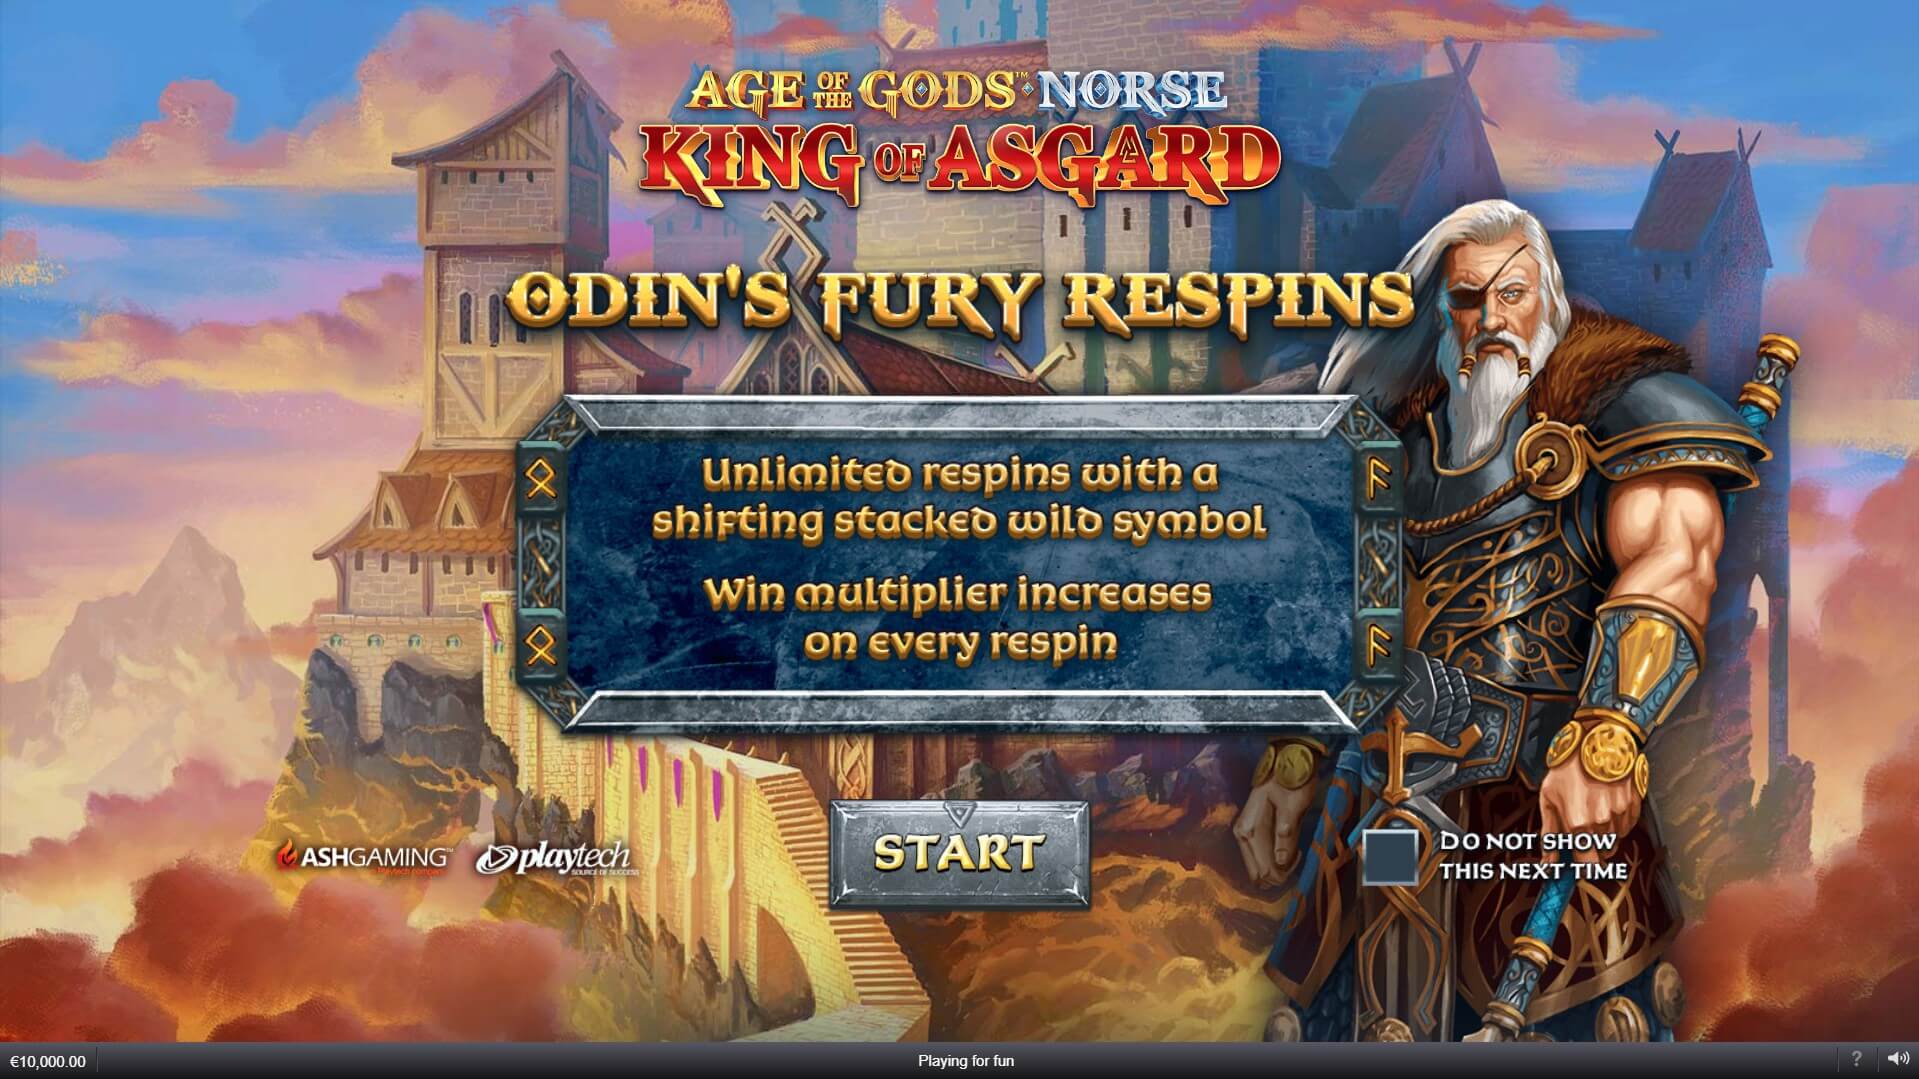 Age of the gods norse: king of asgard